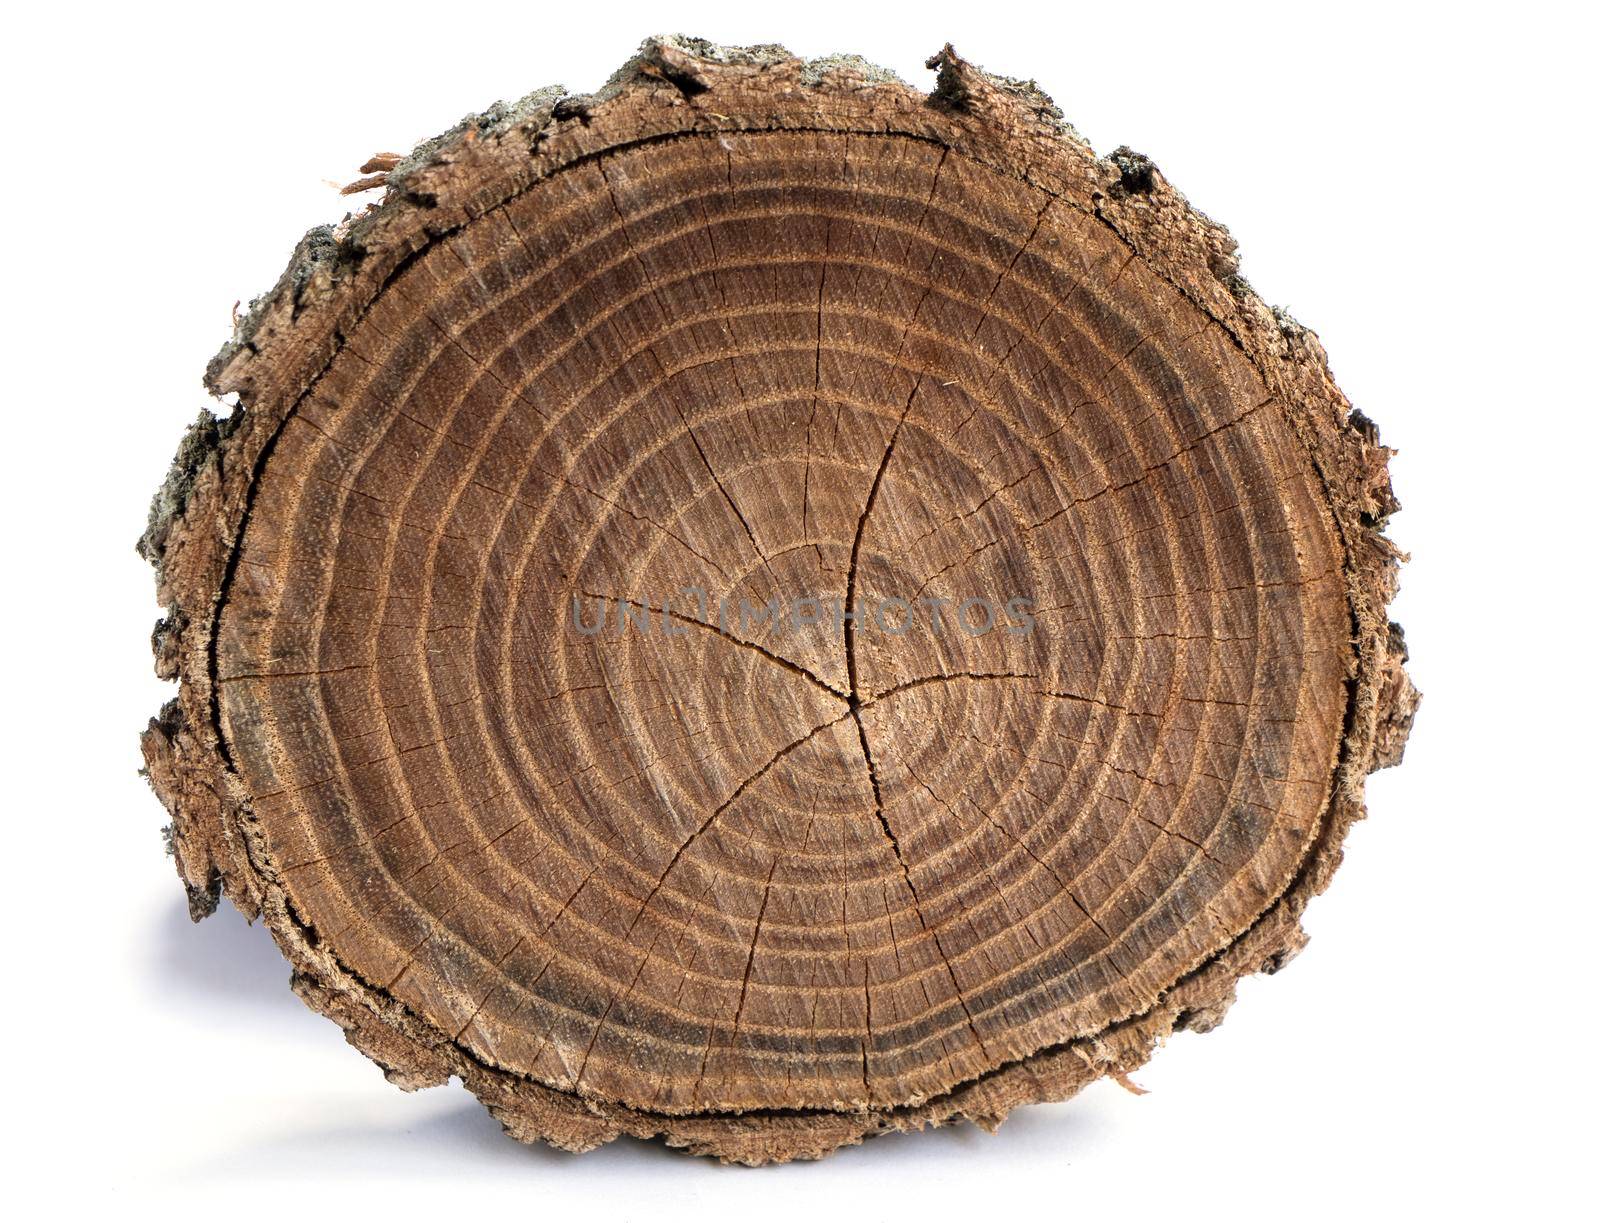 wood background. Old wooden oak tree cut surface. Detailed warm dark brown and orange tones of a felled tree trunk or stump. Rough organic texture of tree rings with close up of end grain.